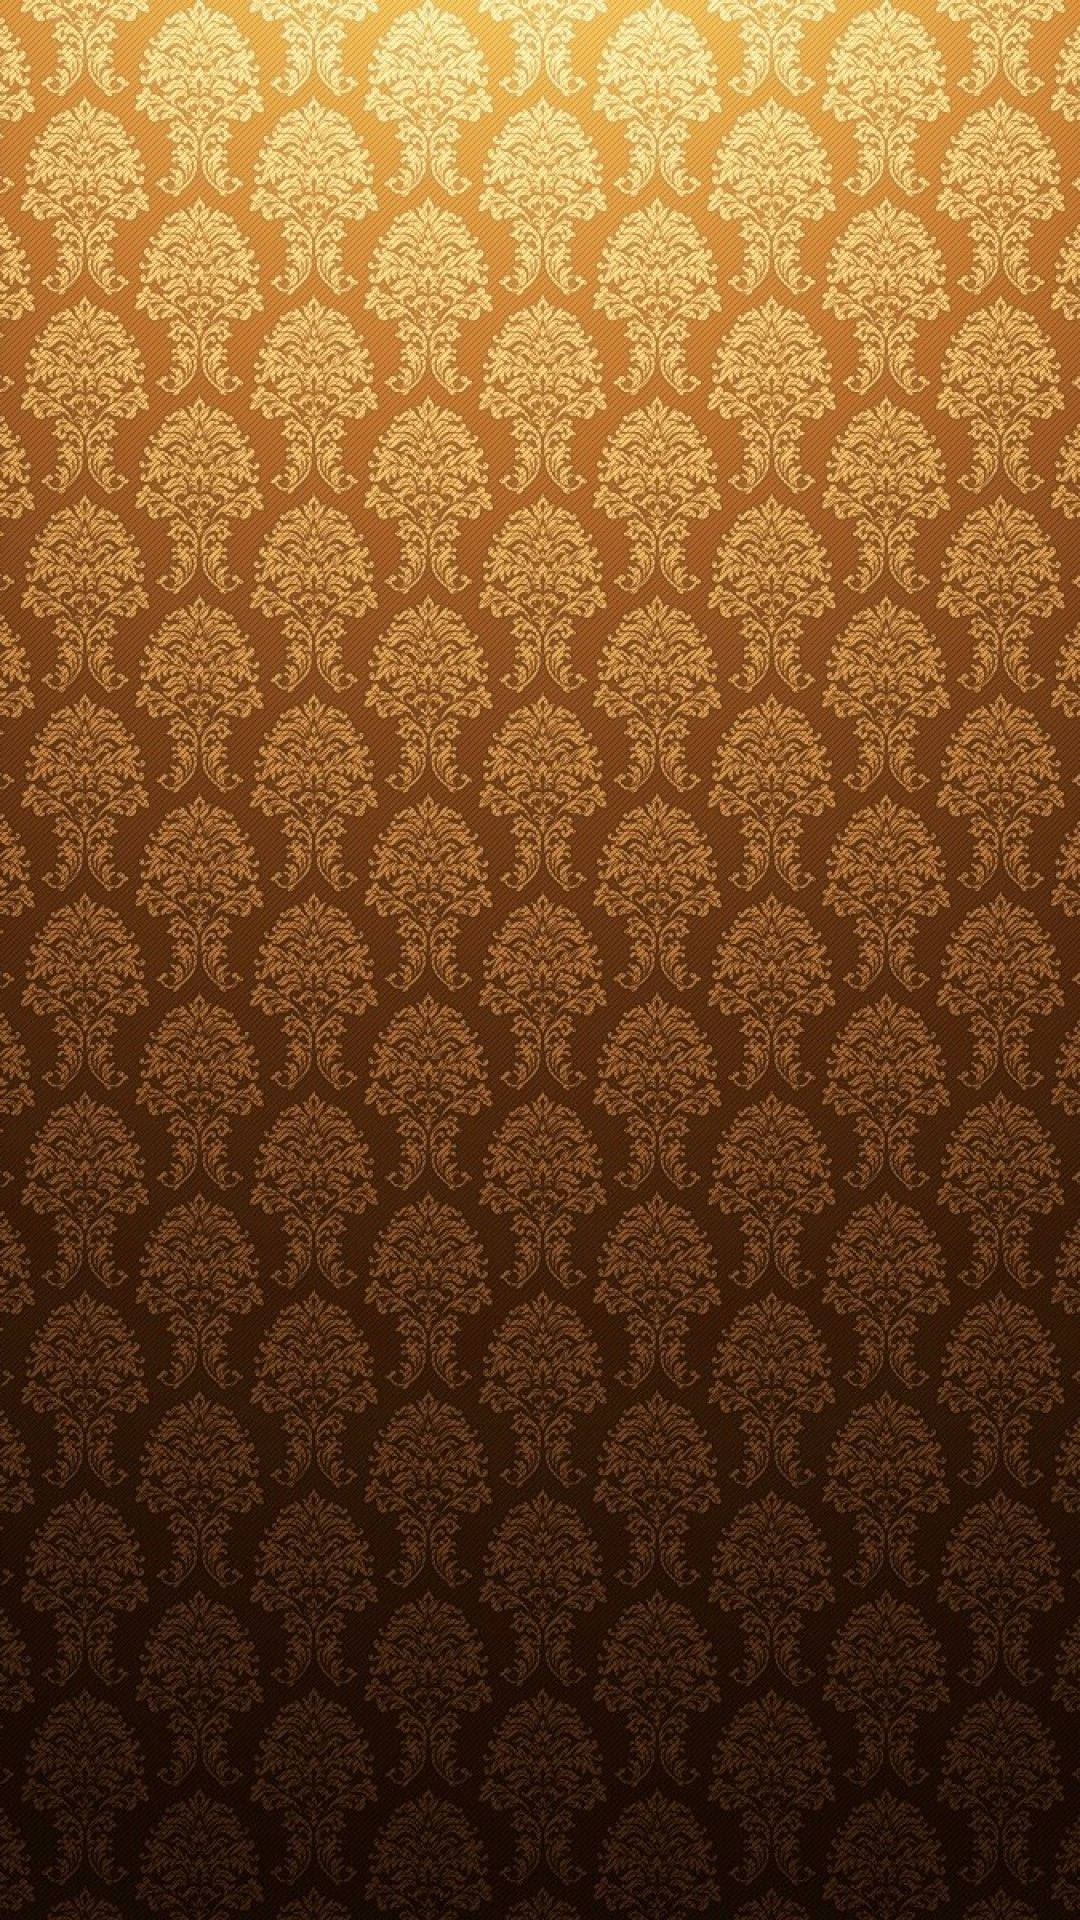 Gold And Brown Iphone Background